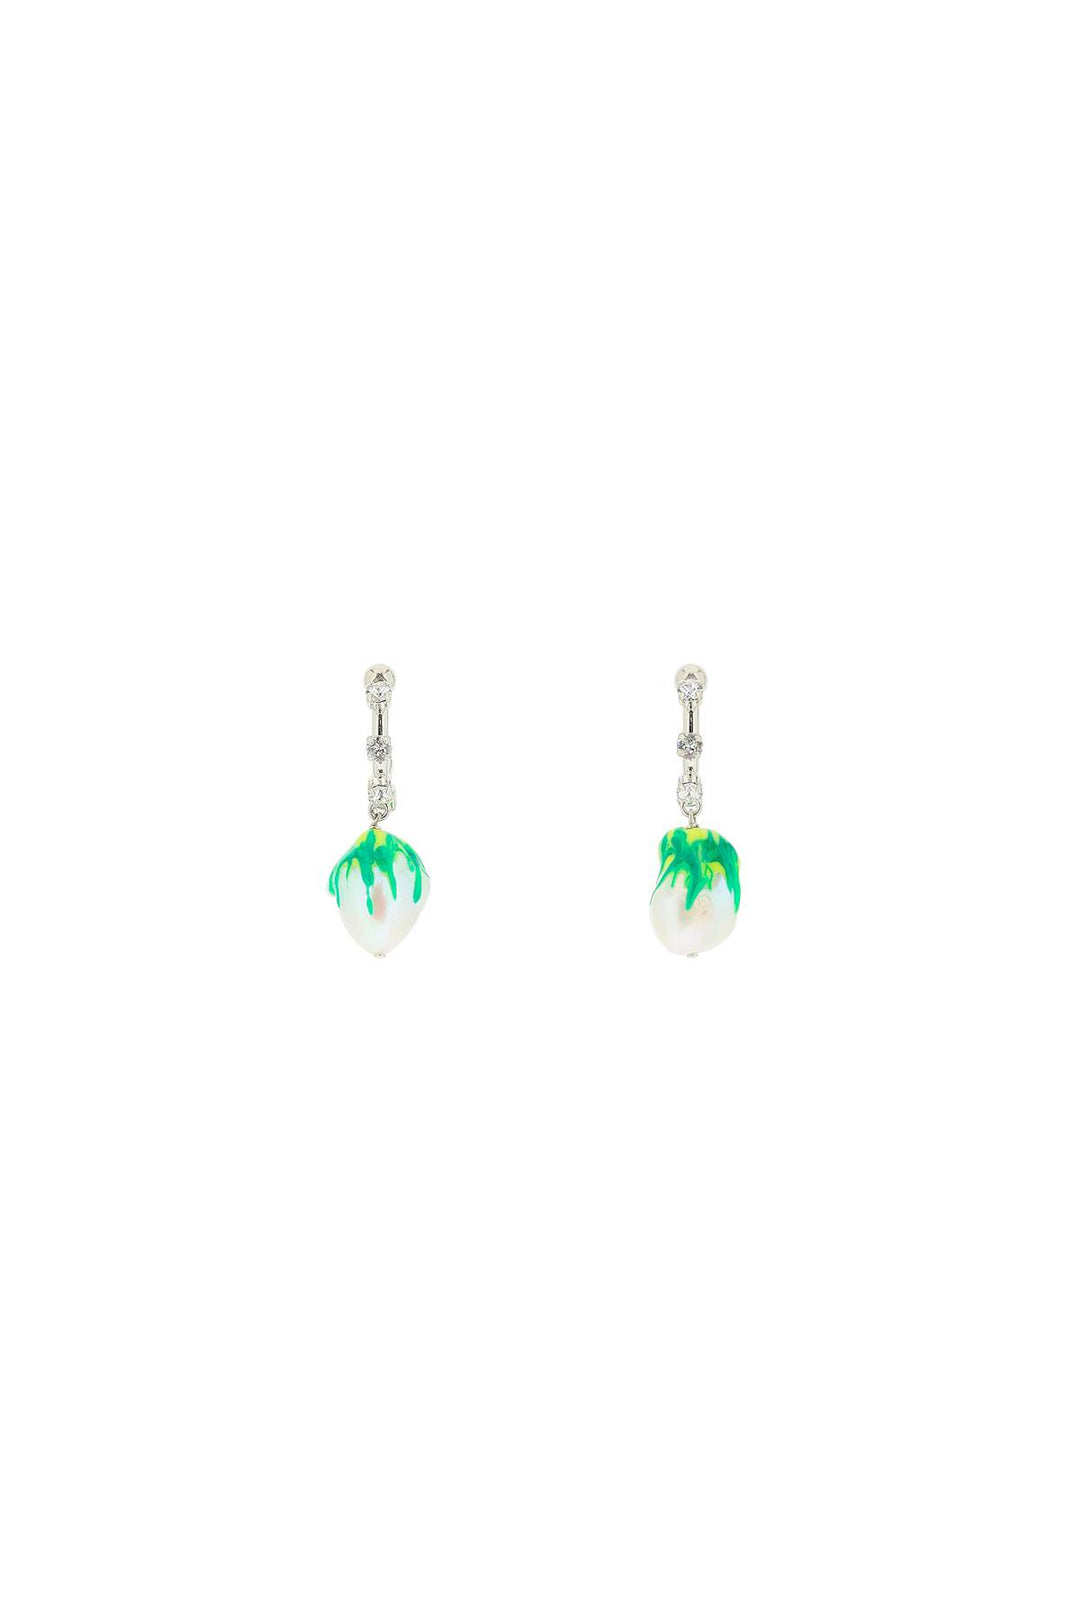 Saf Safu 'Jelly Melted' Earrings   Argento